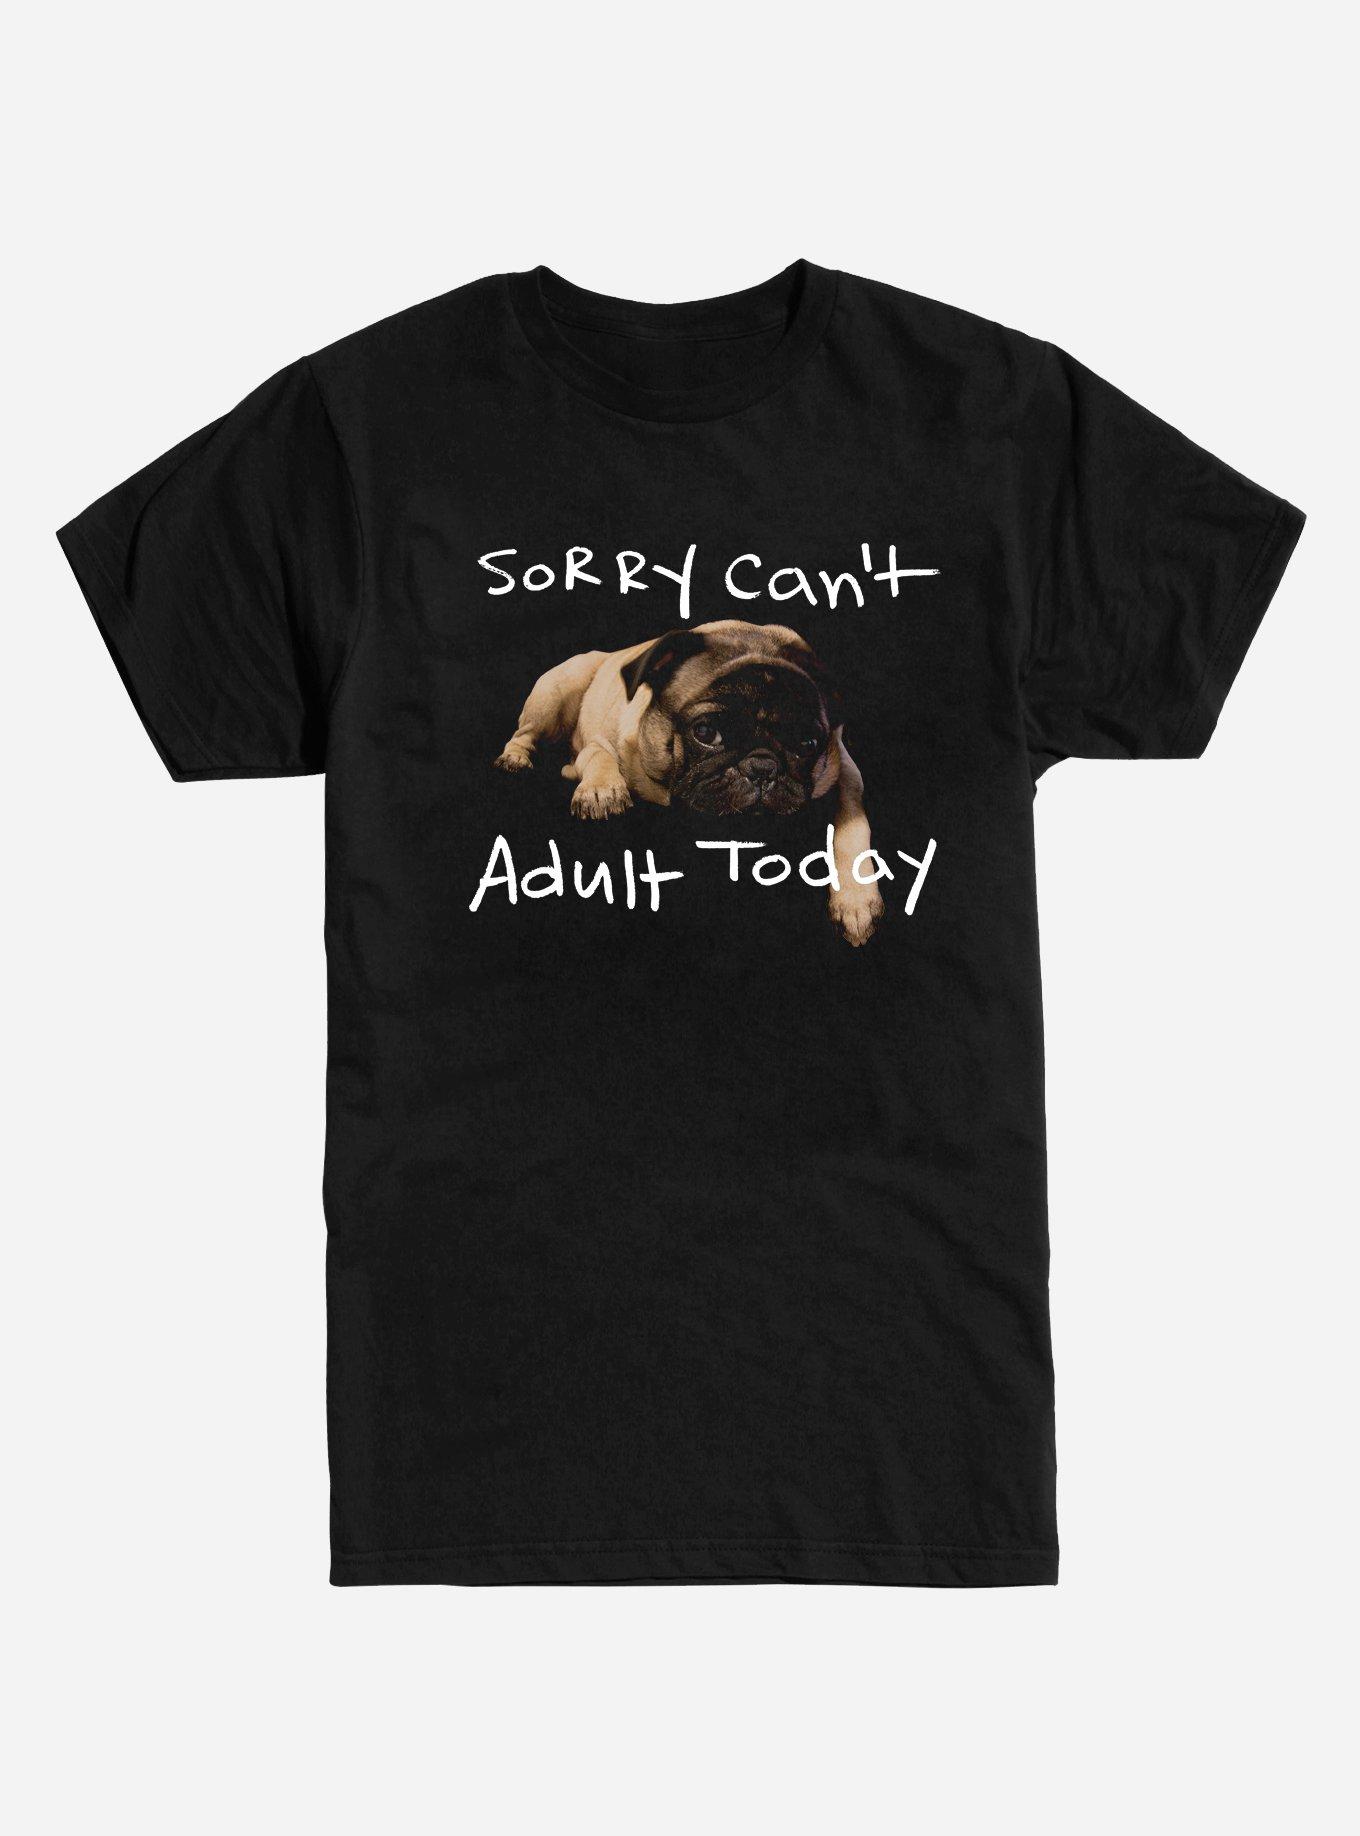 Sorry Can't Adult Today Pug T-Shirt, BLACK, hi-res